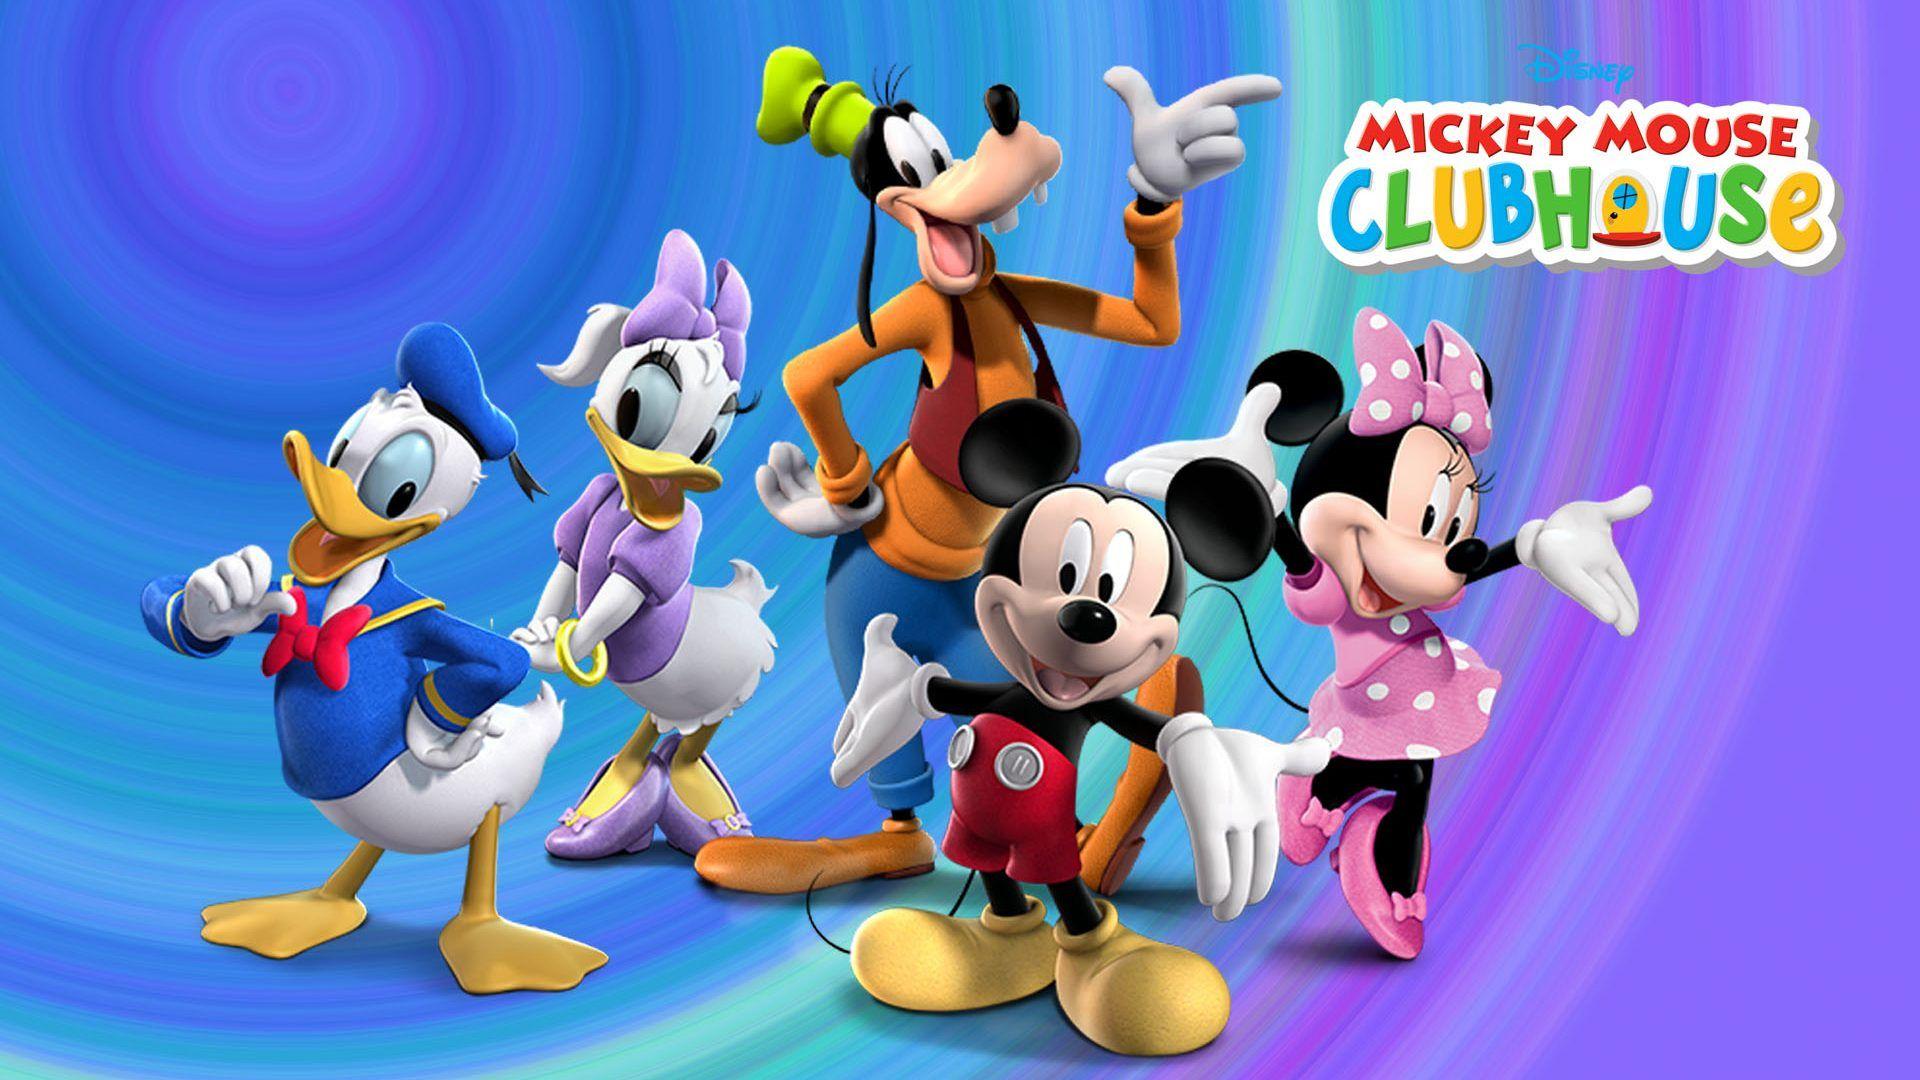 Mickey Mouse Clubhouse Wallpaper Hd